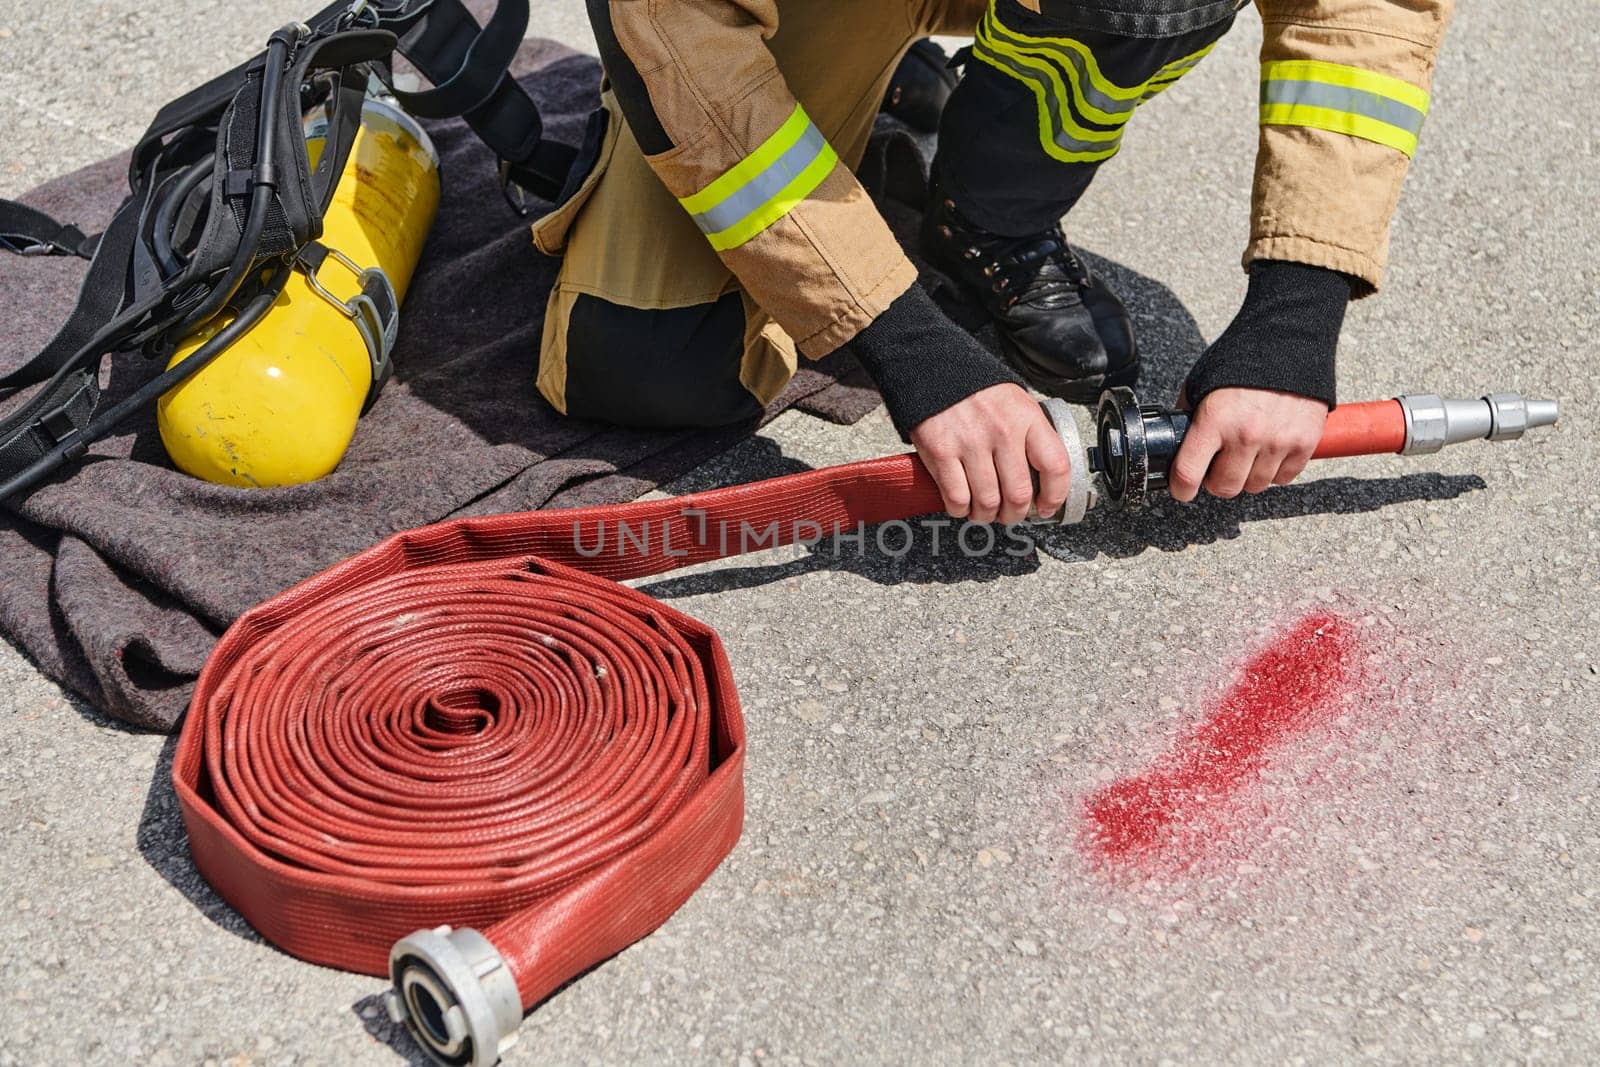 A dedicated firefighter meticulously coils the fire hose after successfully extinguishing a blaze, showcasing the critical post-incident responsibilities.